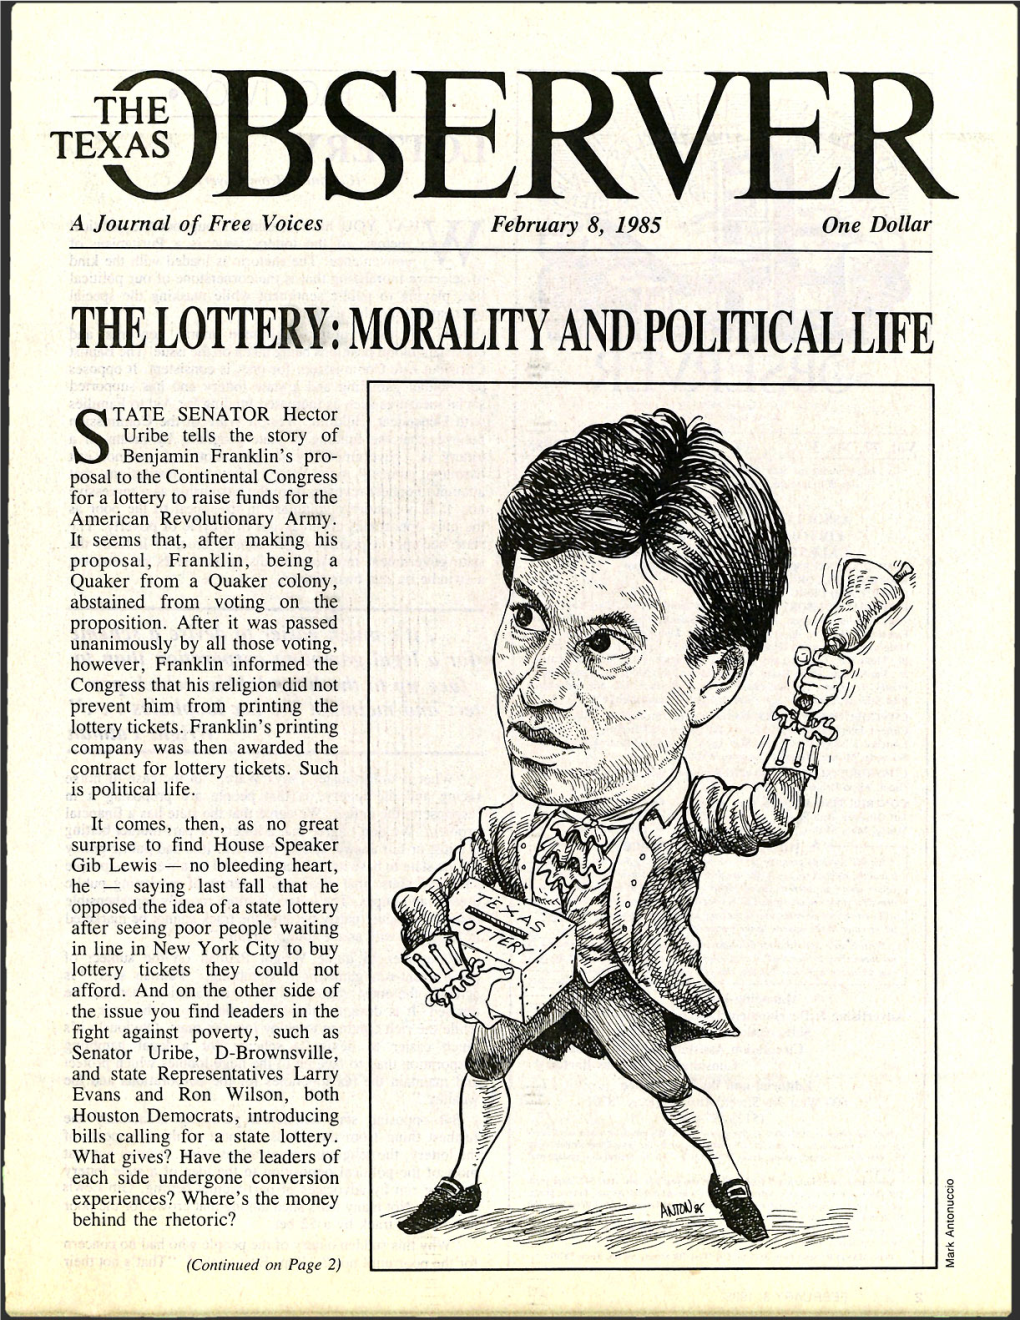 The Lottery: Morality and Political Life